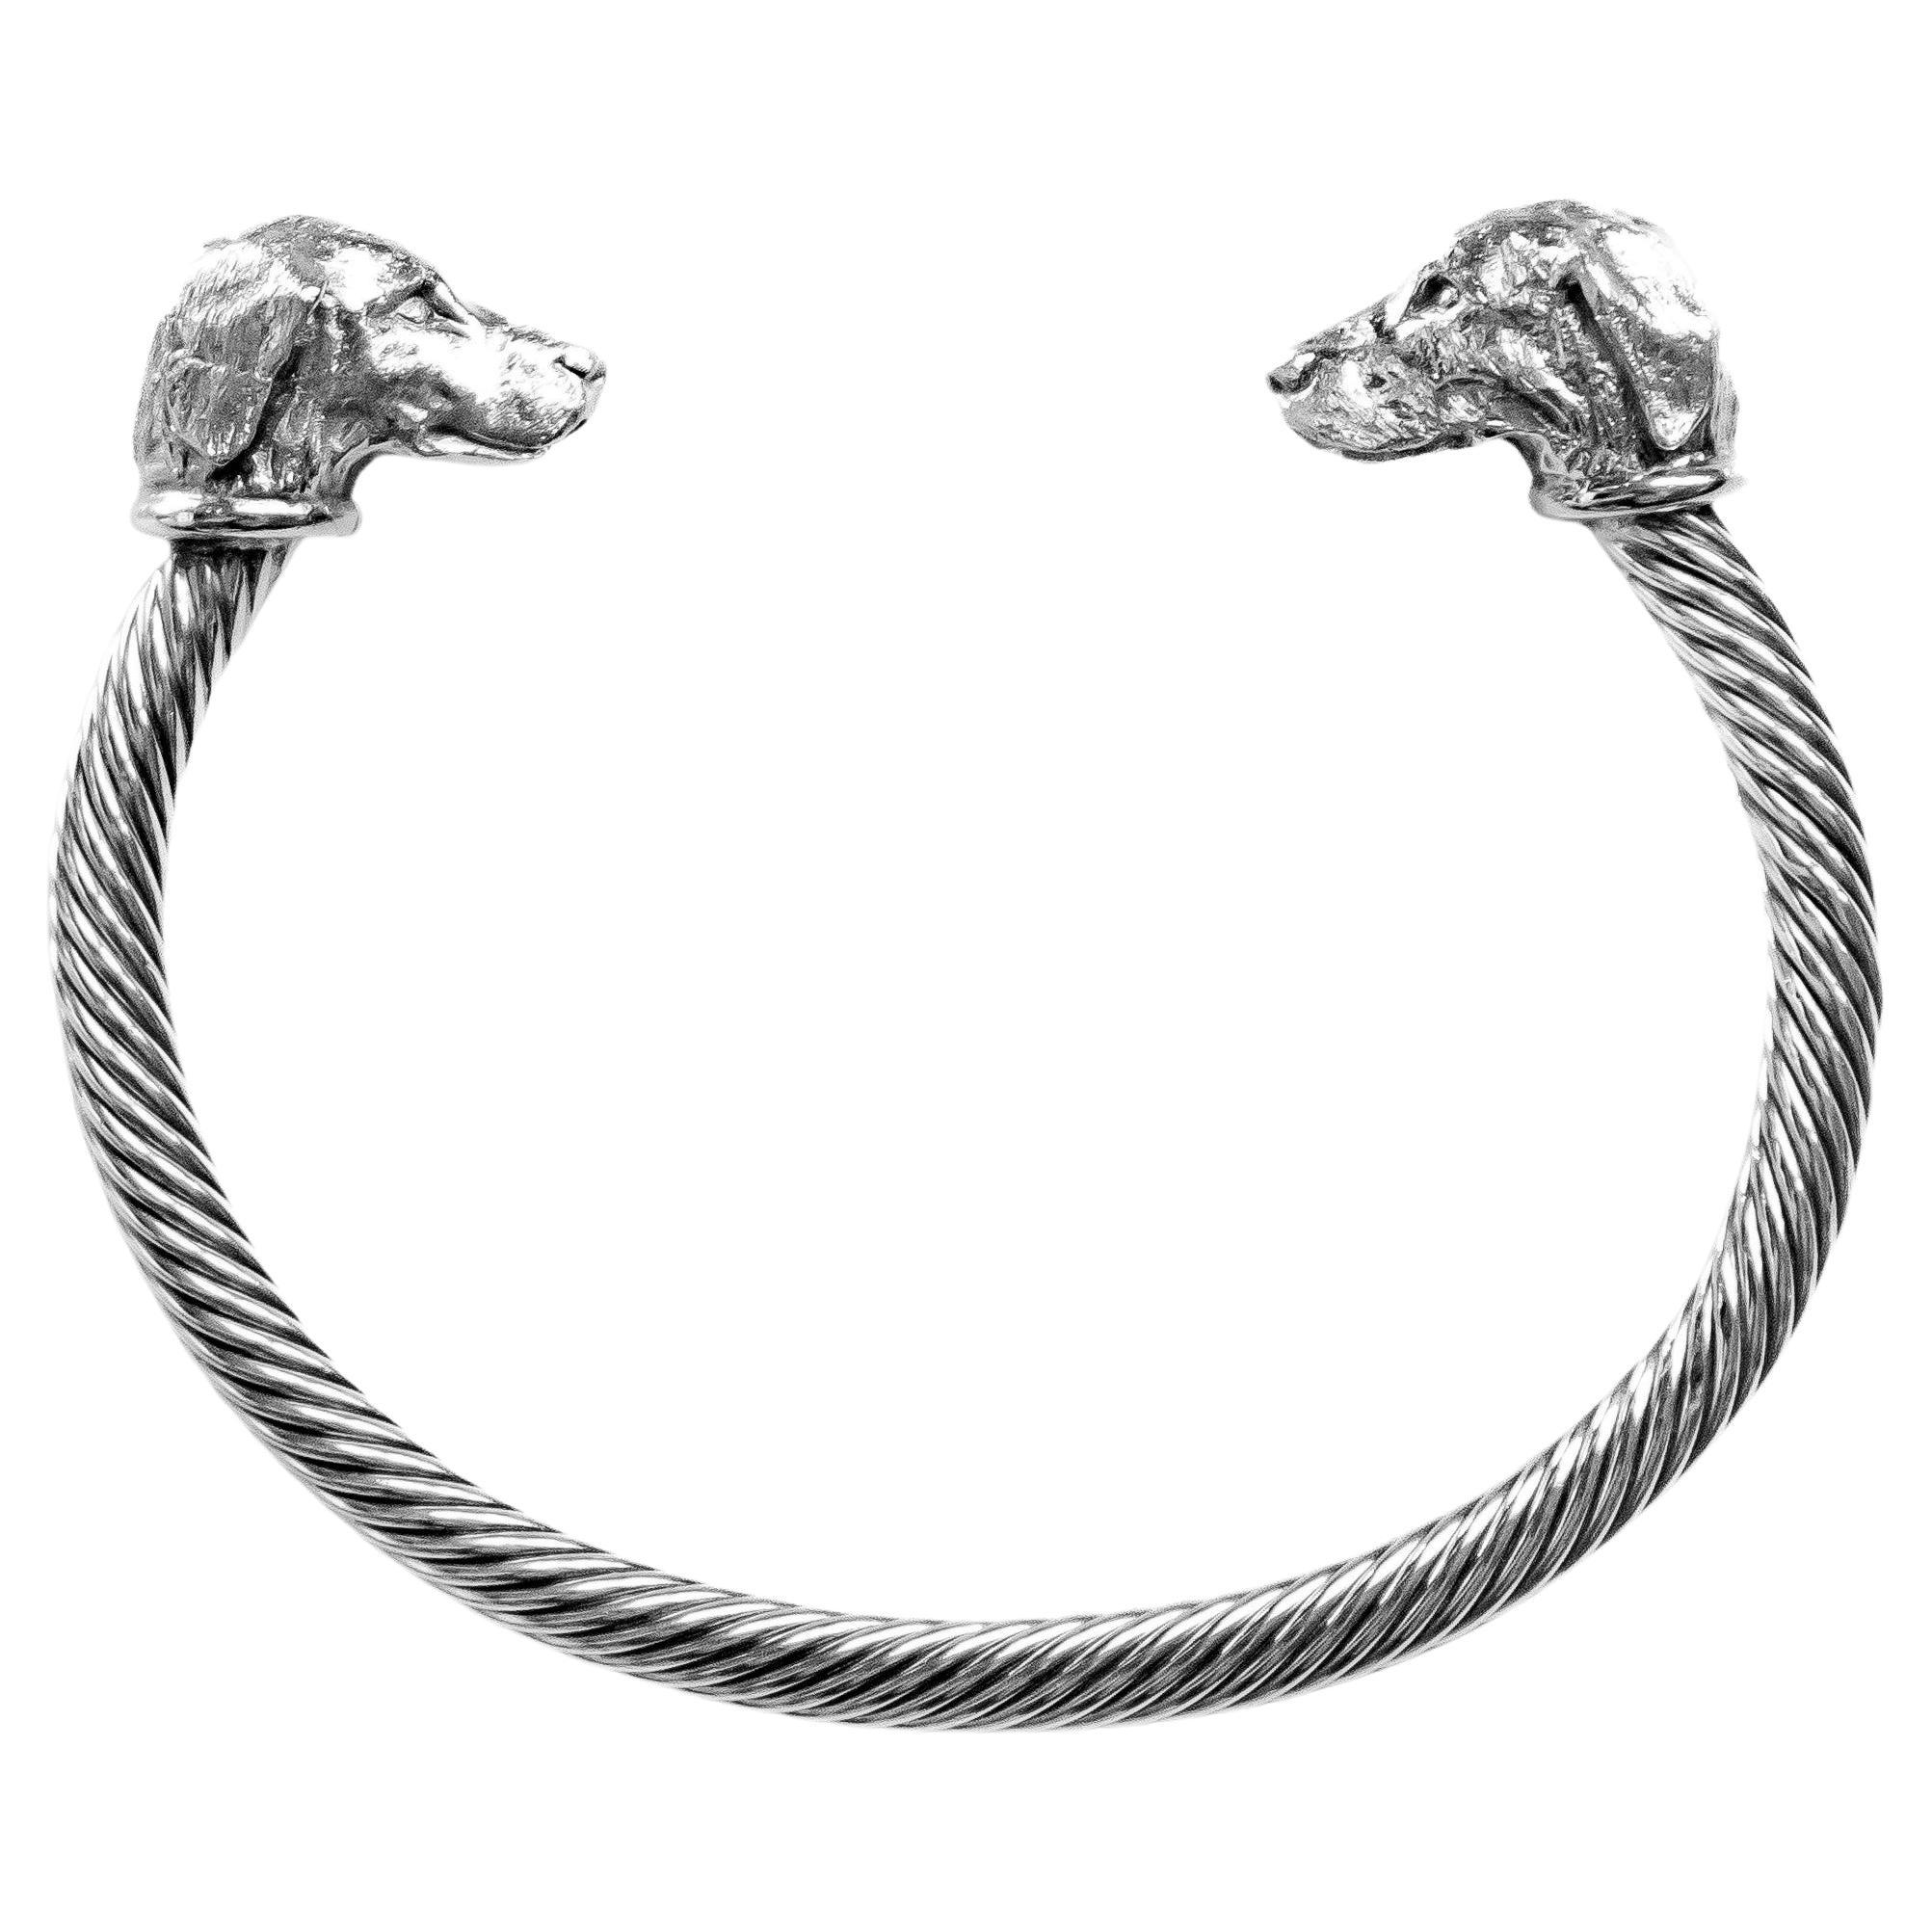 Paul Eaton Sculpted Labrador Retriever Heads on Sterling Silver Twisted Bangle